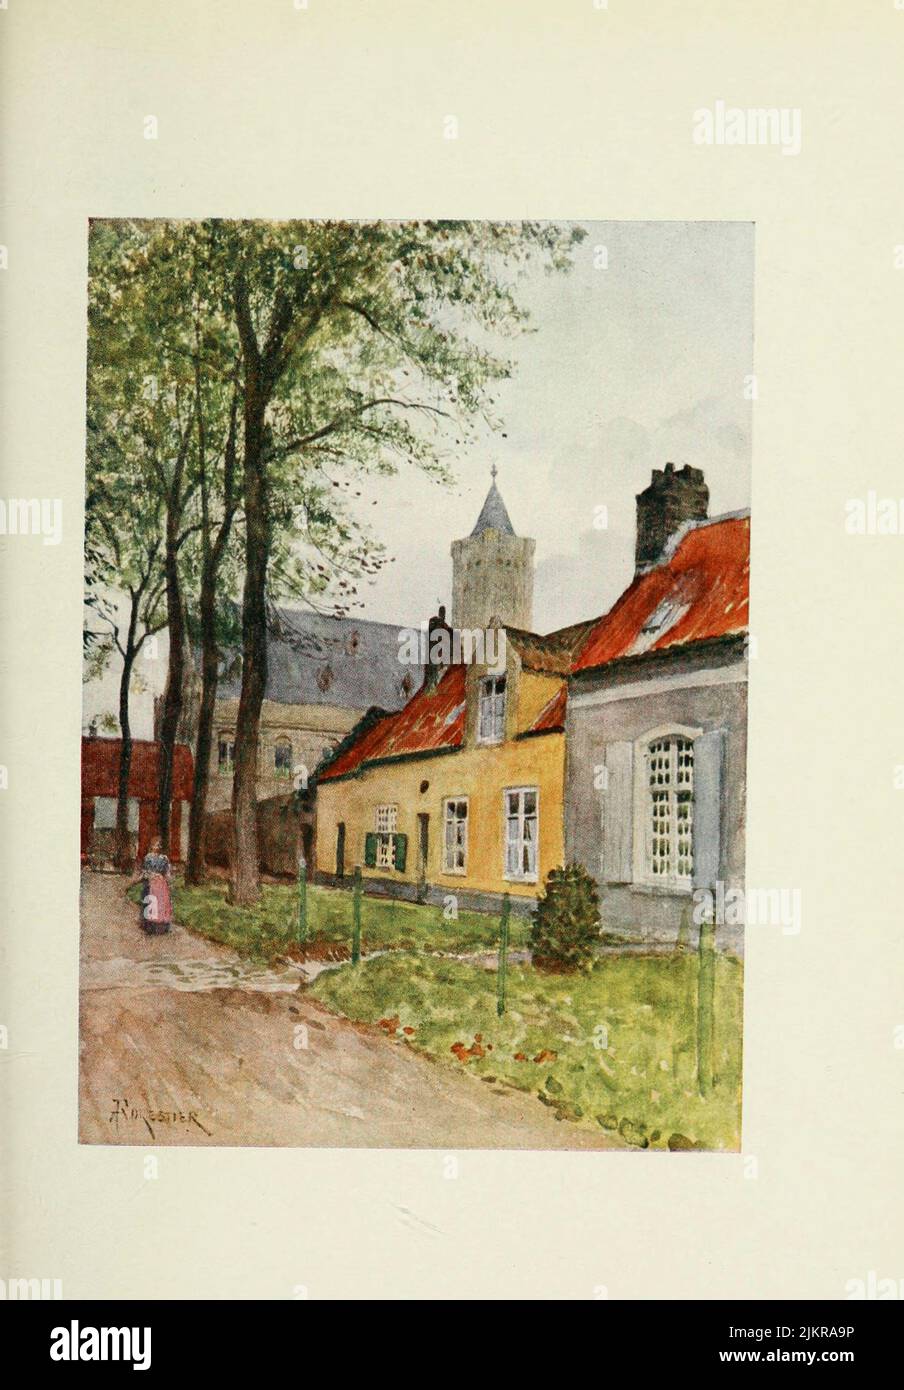 Nieuport Hall and Vicarage Painted by Amedee Forestier, from the book '  Bruges and West Flanders ' by George William Thomson Omond, Publication date 1906 Publisher London : A. & C. Black Sir Amédée Forestier (Paris 1854 – 18 November 1930 London) was an Anglo-French artist and illustrator who specialised in historical and prehistoric scenes, and landscapes. Stock Photo